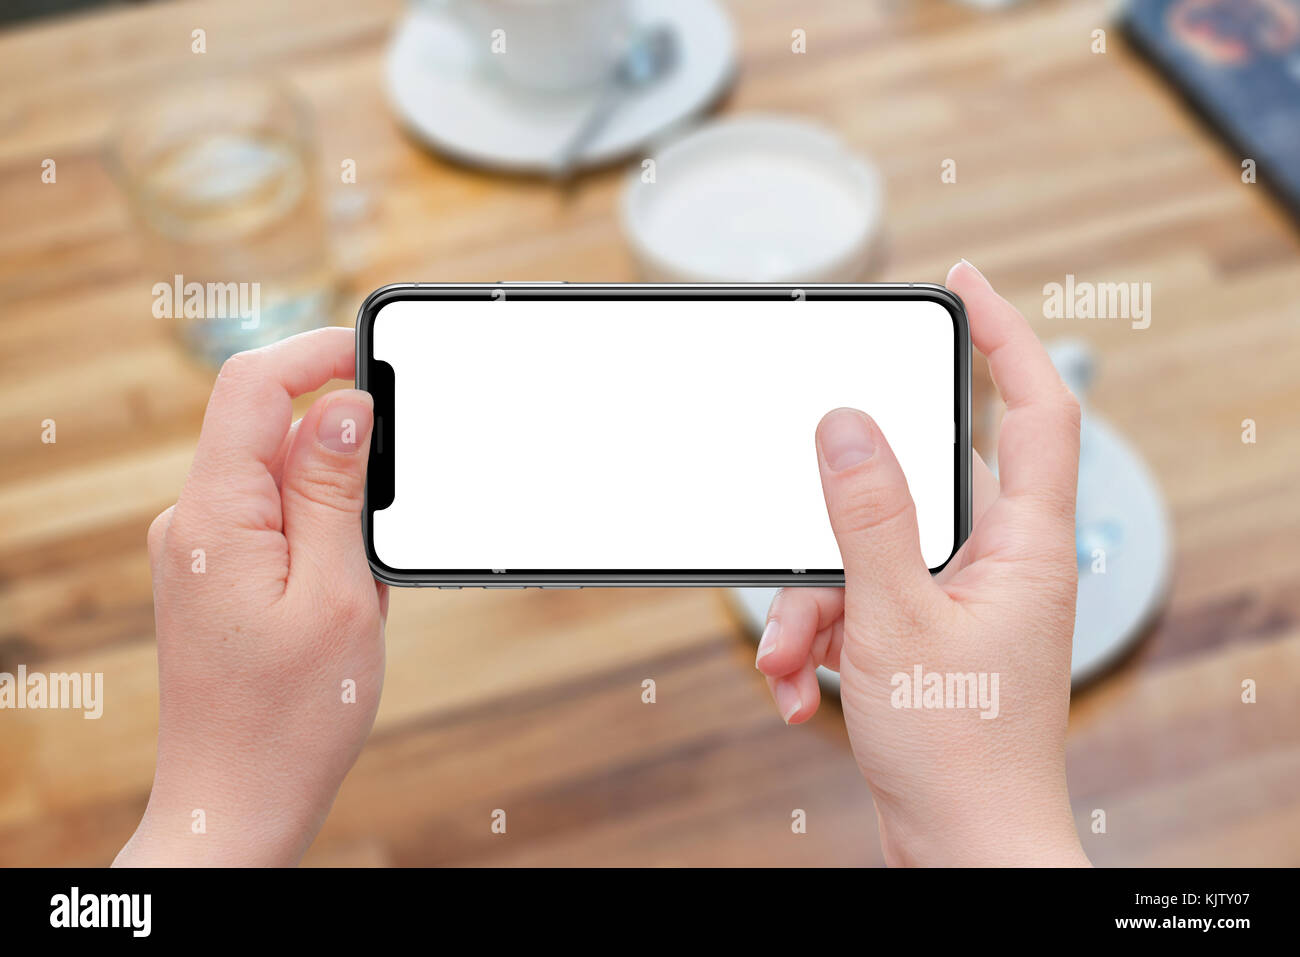 Woman holding modern smart phone in horizontal position. Isolated white screen for mockup design promotion. Coffee table in background. Stock Photo